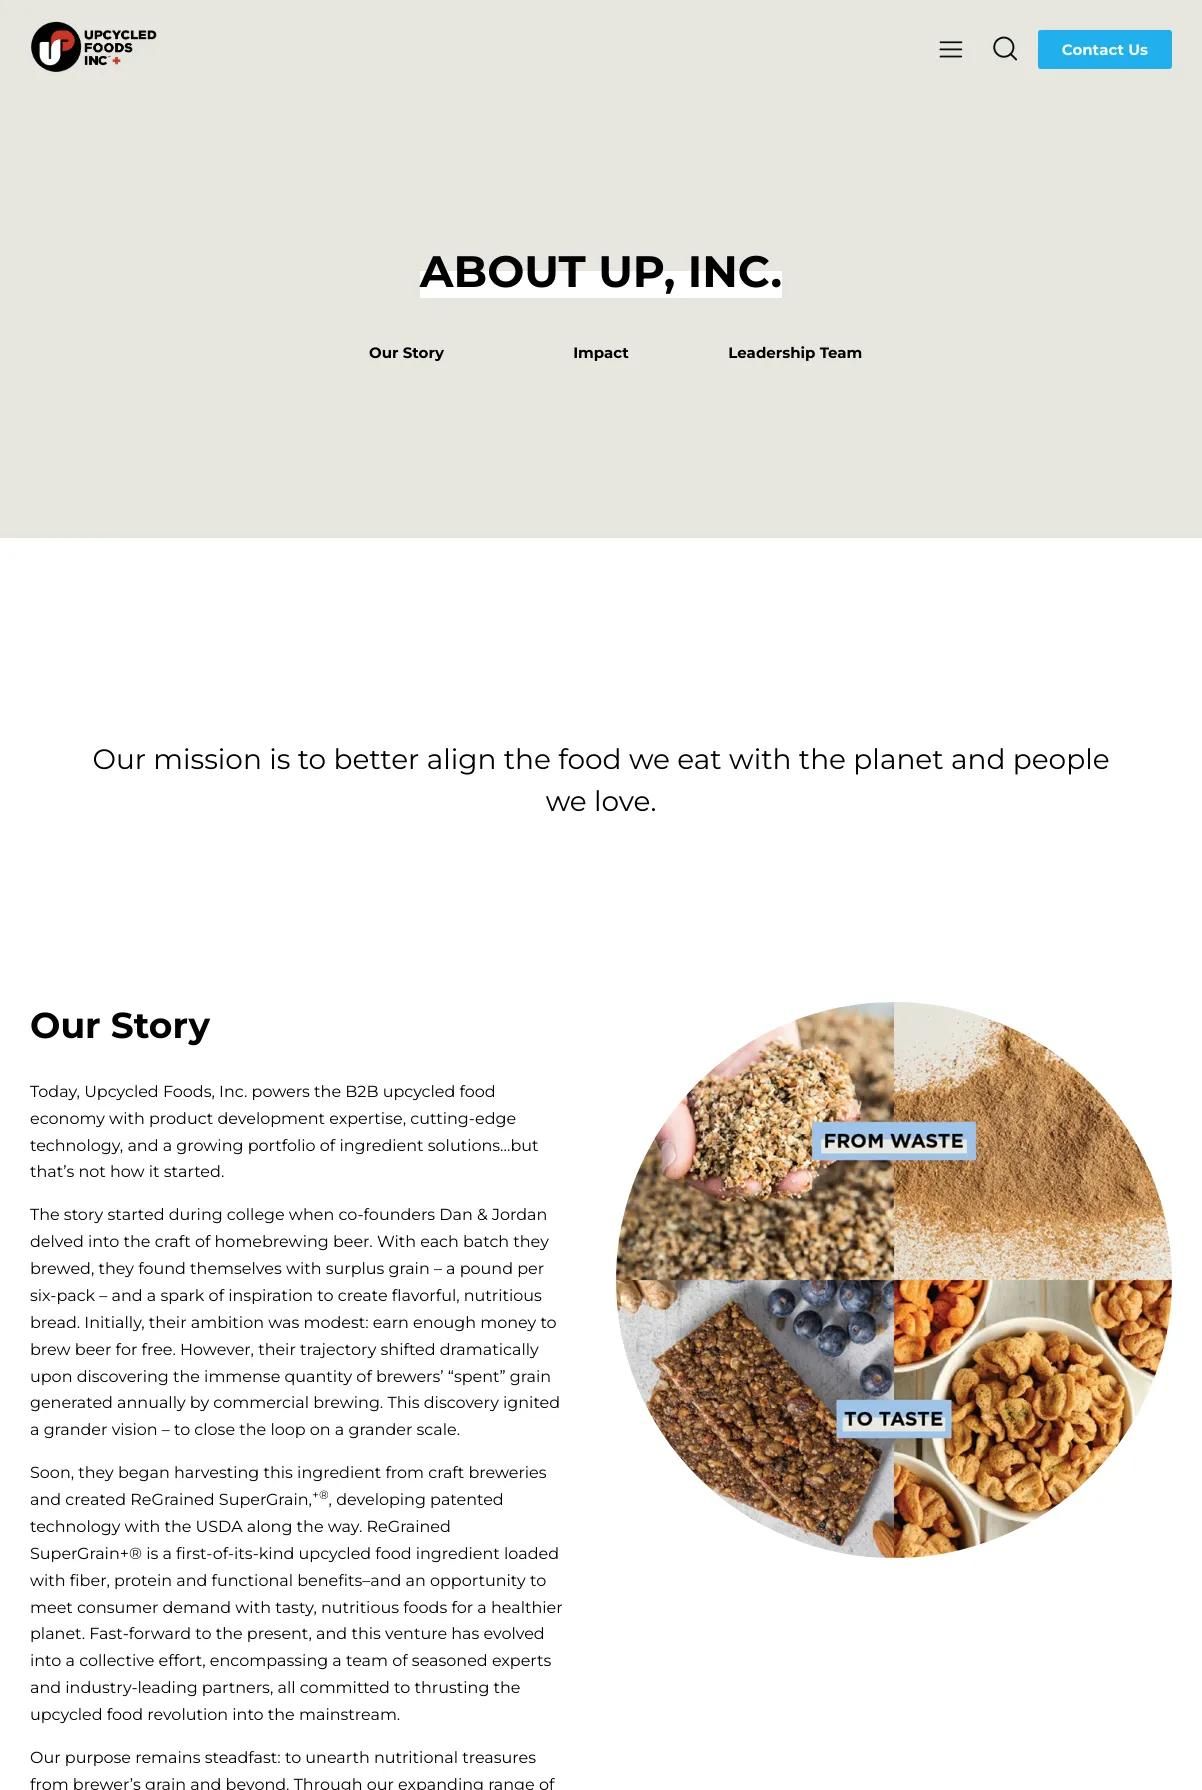 Screenshot 2 of ReGrained (Example Shopify Food and Beverage Website)